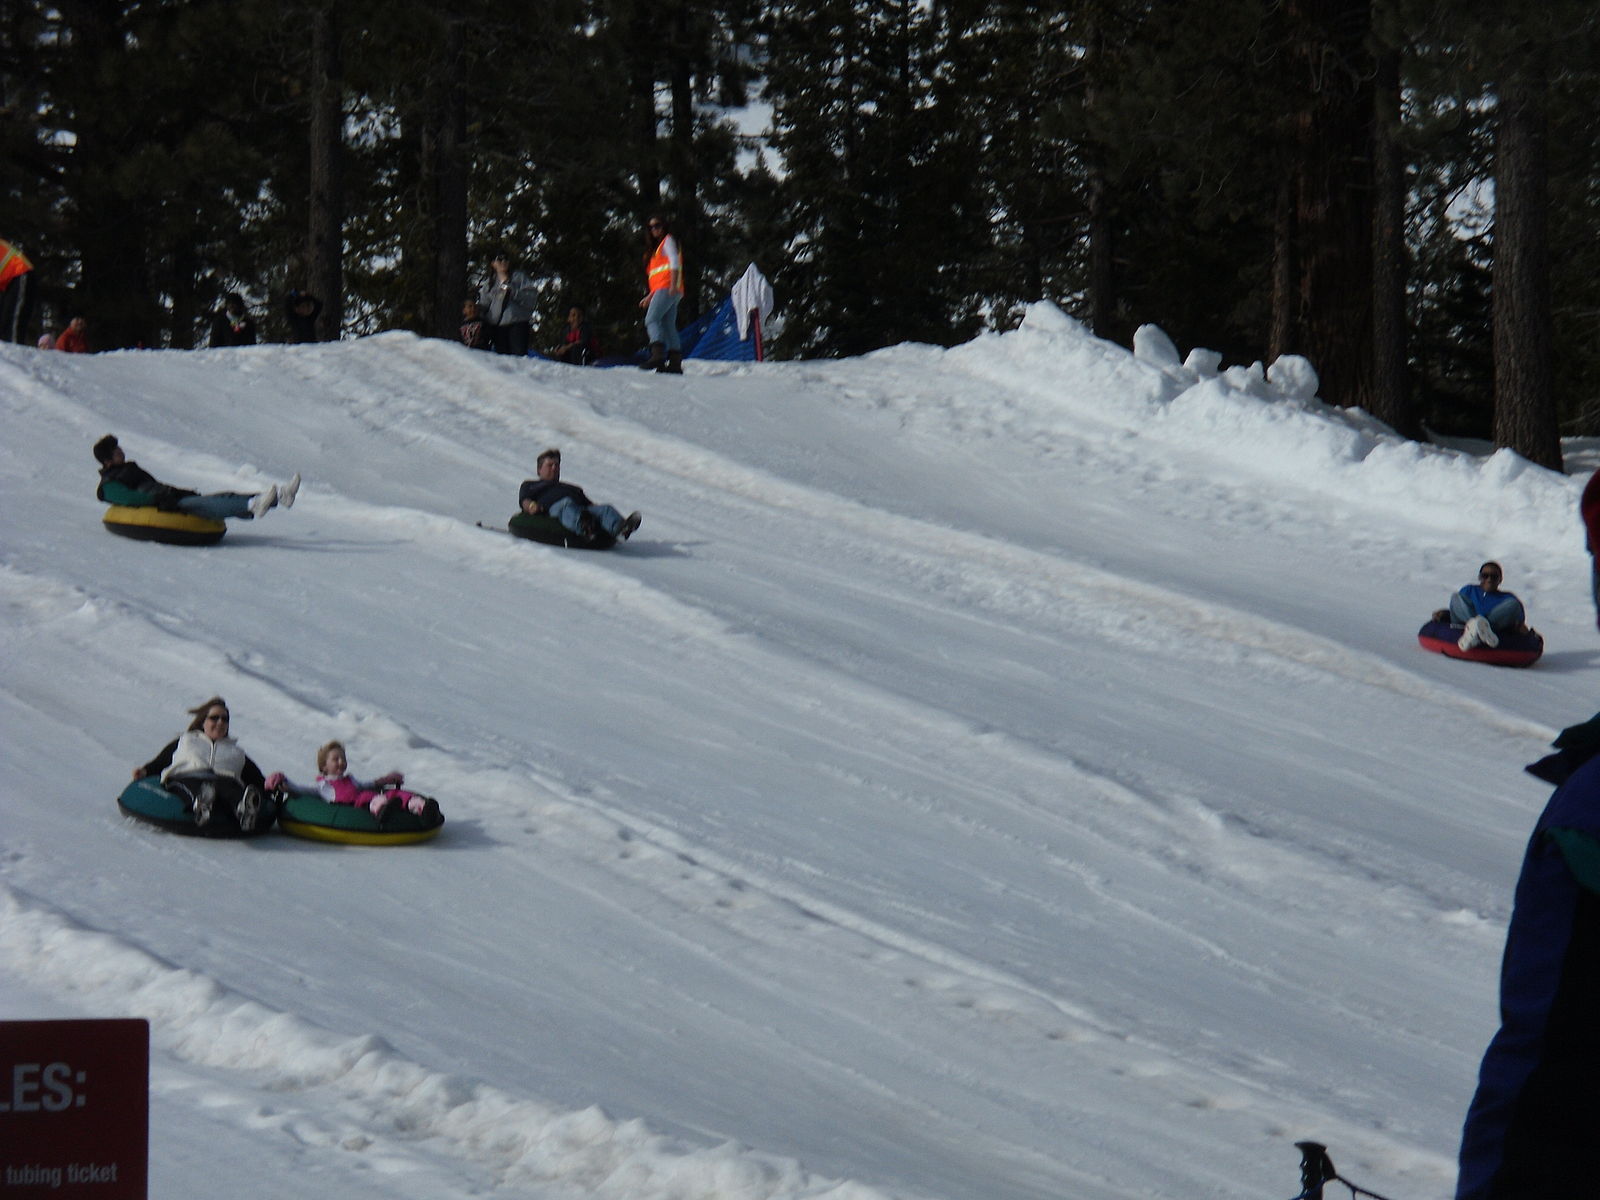 Snow tubers in action (Photo: Wikimedia Commons)